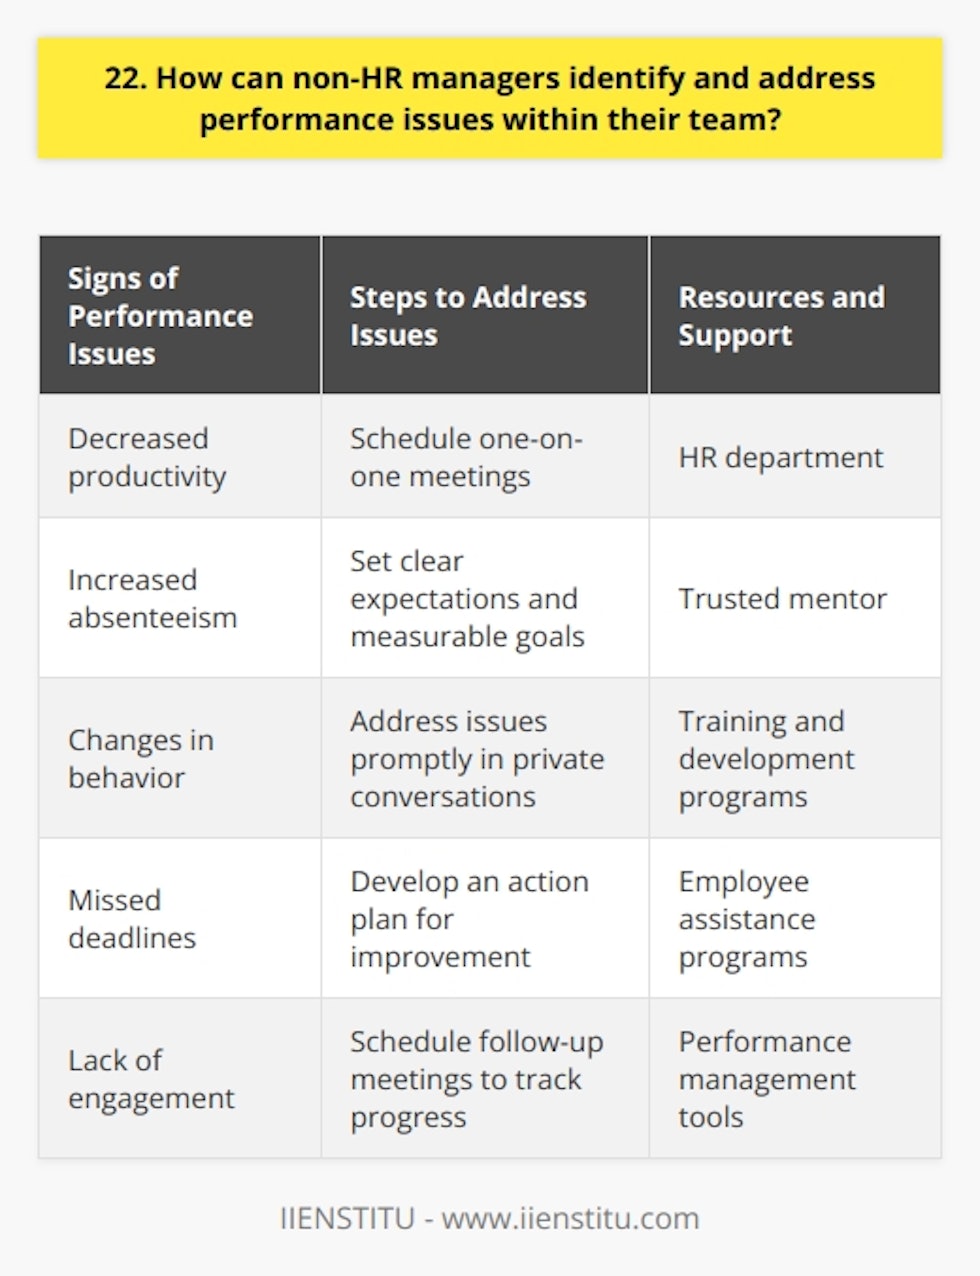 As a non-HR manager, identifying performance issues within your team is crucial. Pay attention to changes in behavior, such as decreased productivity or increased absenteeism. These could be signs of underlying problems. Communicate Regularly Schedule one-on-one meetings with your team members. Ask about their challenges and provide support. Regular check-ins help build trust and create a safe space for discussing performance concerns. Set Clear Expectations Make sure your team understands their roles and responsibilities. Set measurable goals and provide regular feedback. When expectations are clear, its easier to identify when someone is falling short. Address Issues Promptly When you notice a performance issue, address it promptly. Dont wait for it to escalate. Have a private conversation with the team member to discuss your concerns and listen to their perspective. Develop an Action Plan Work with the team member to develop an action plan for improvement. Set specific, measurable goals and provide the necessary resources and support. Schedule follow-up meetings to track progress and make adjustments as needed. Seek Help When Needed If the performance issue persists or youre unsure how to handle it, dont hesitate to seek help. Consult with your HR department or a trusted mentor for guidance and support. Remember, addressing performance issues is never easy, but its essential for the success of your team. By communicating regularly, setting clear expectations, and addressing issues promptly, you can help your team members improve and thrive in their roles.